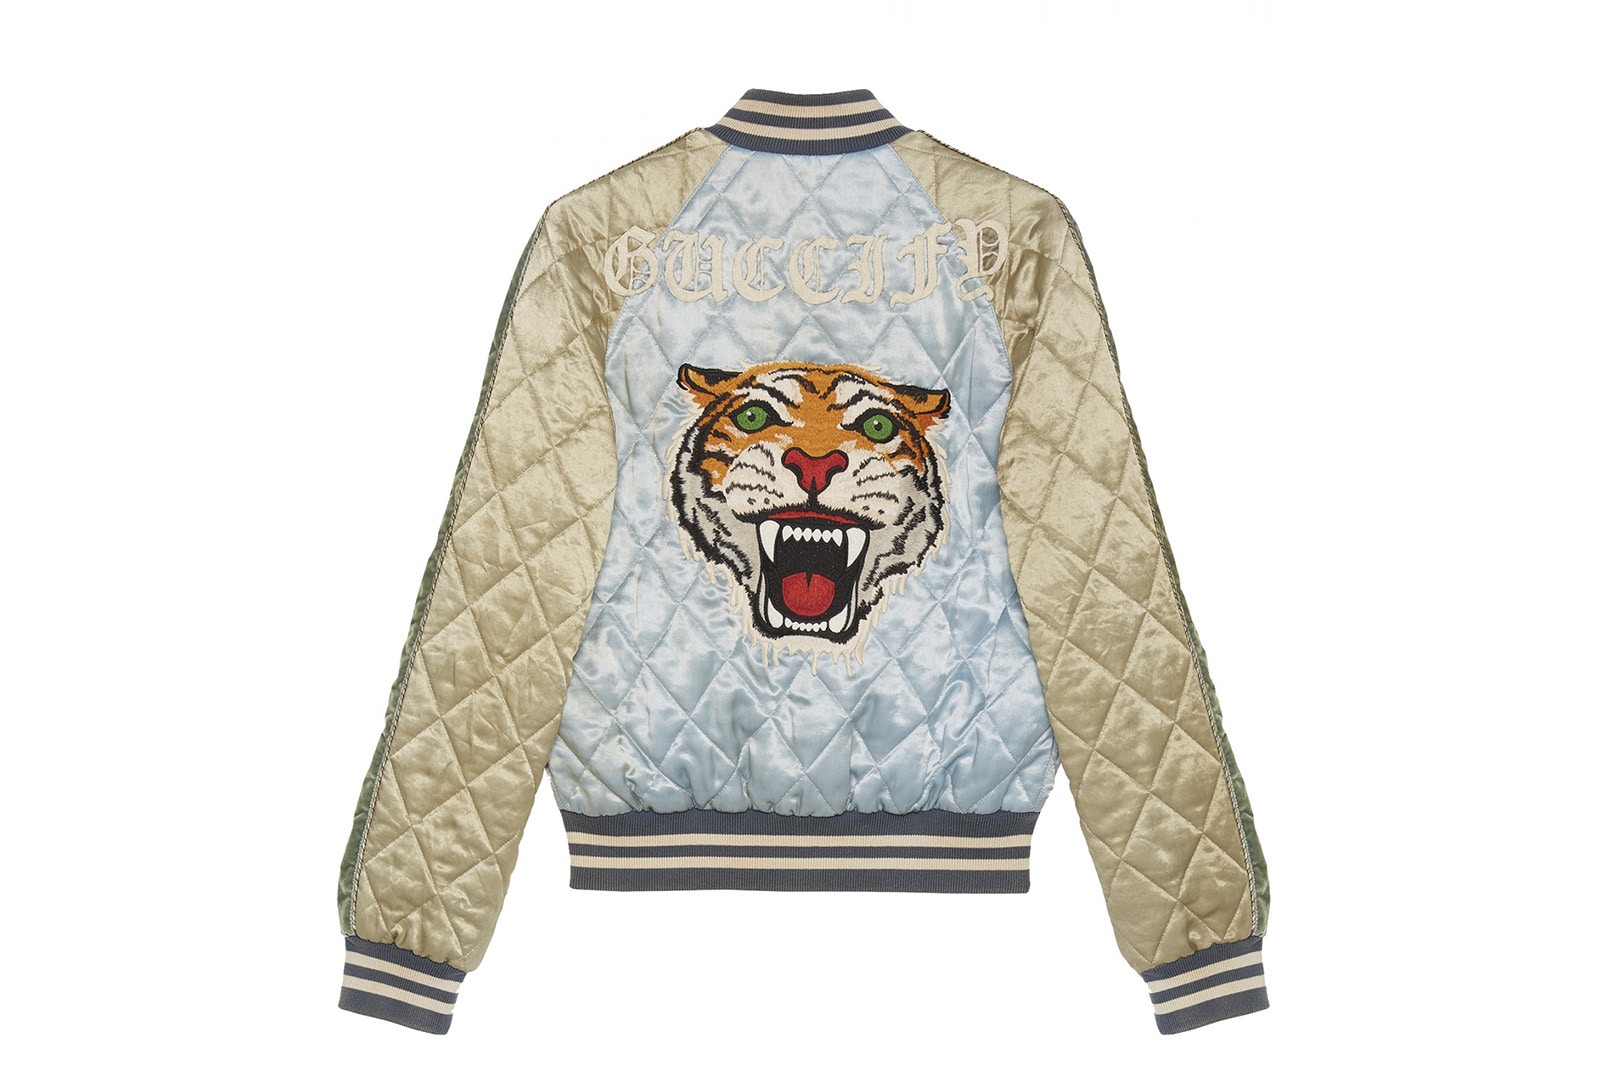 An Exclusive Capsule Collection By Gucci & Dover Street Market 